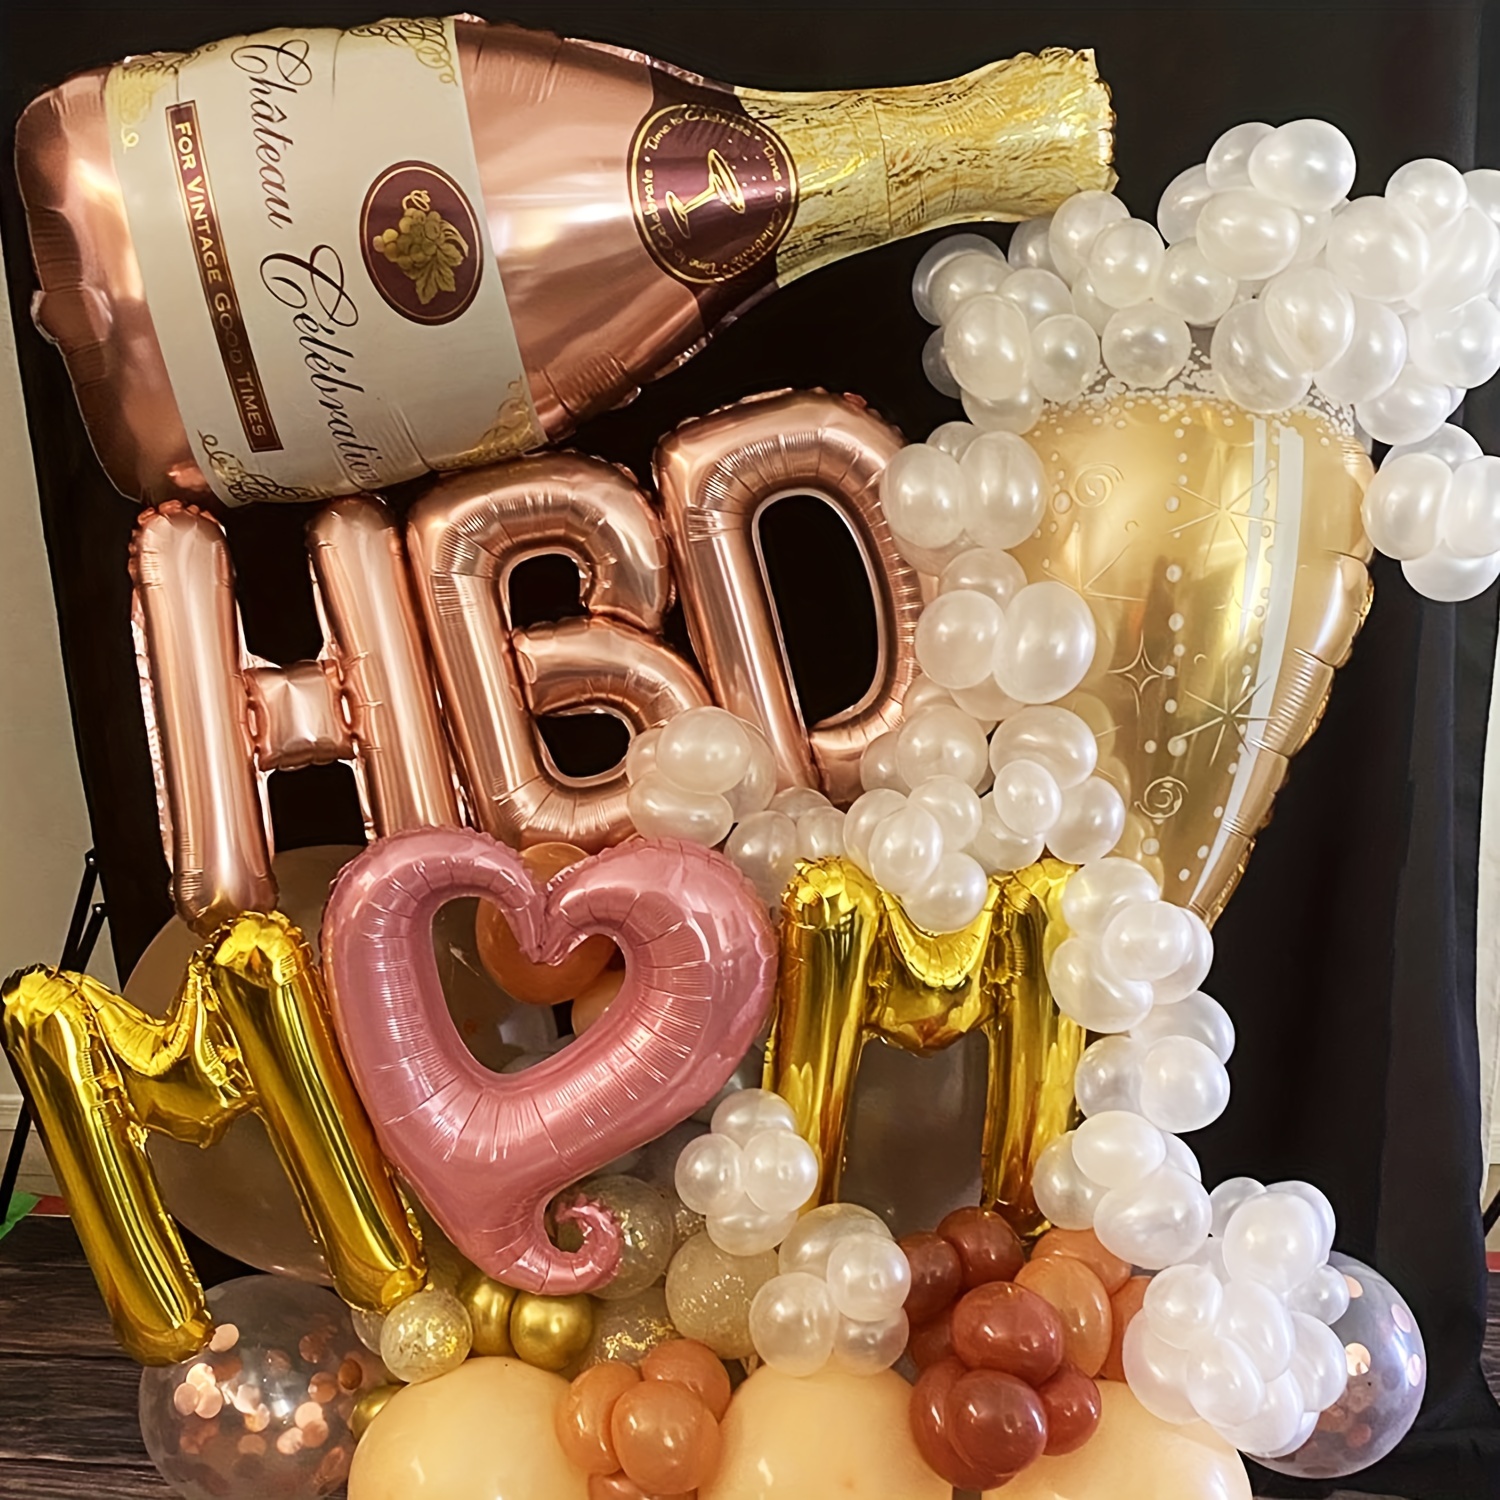  Champagne Balloon, 10 Pcs/5set Champagne Balloon Rose Gold Beer  Bottle Wine Glass Shape Reusable for Party, Birthday celebration,  Anniversary Graduation, Family Gathering : Home & Kitchen